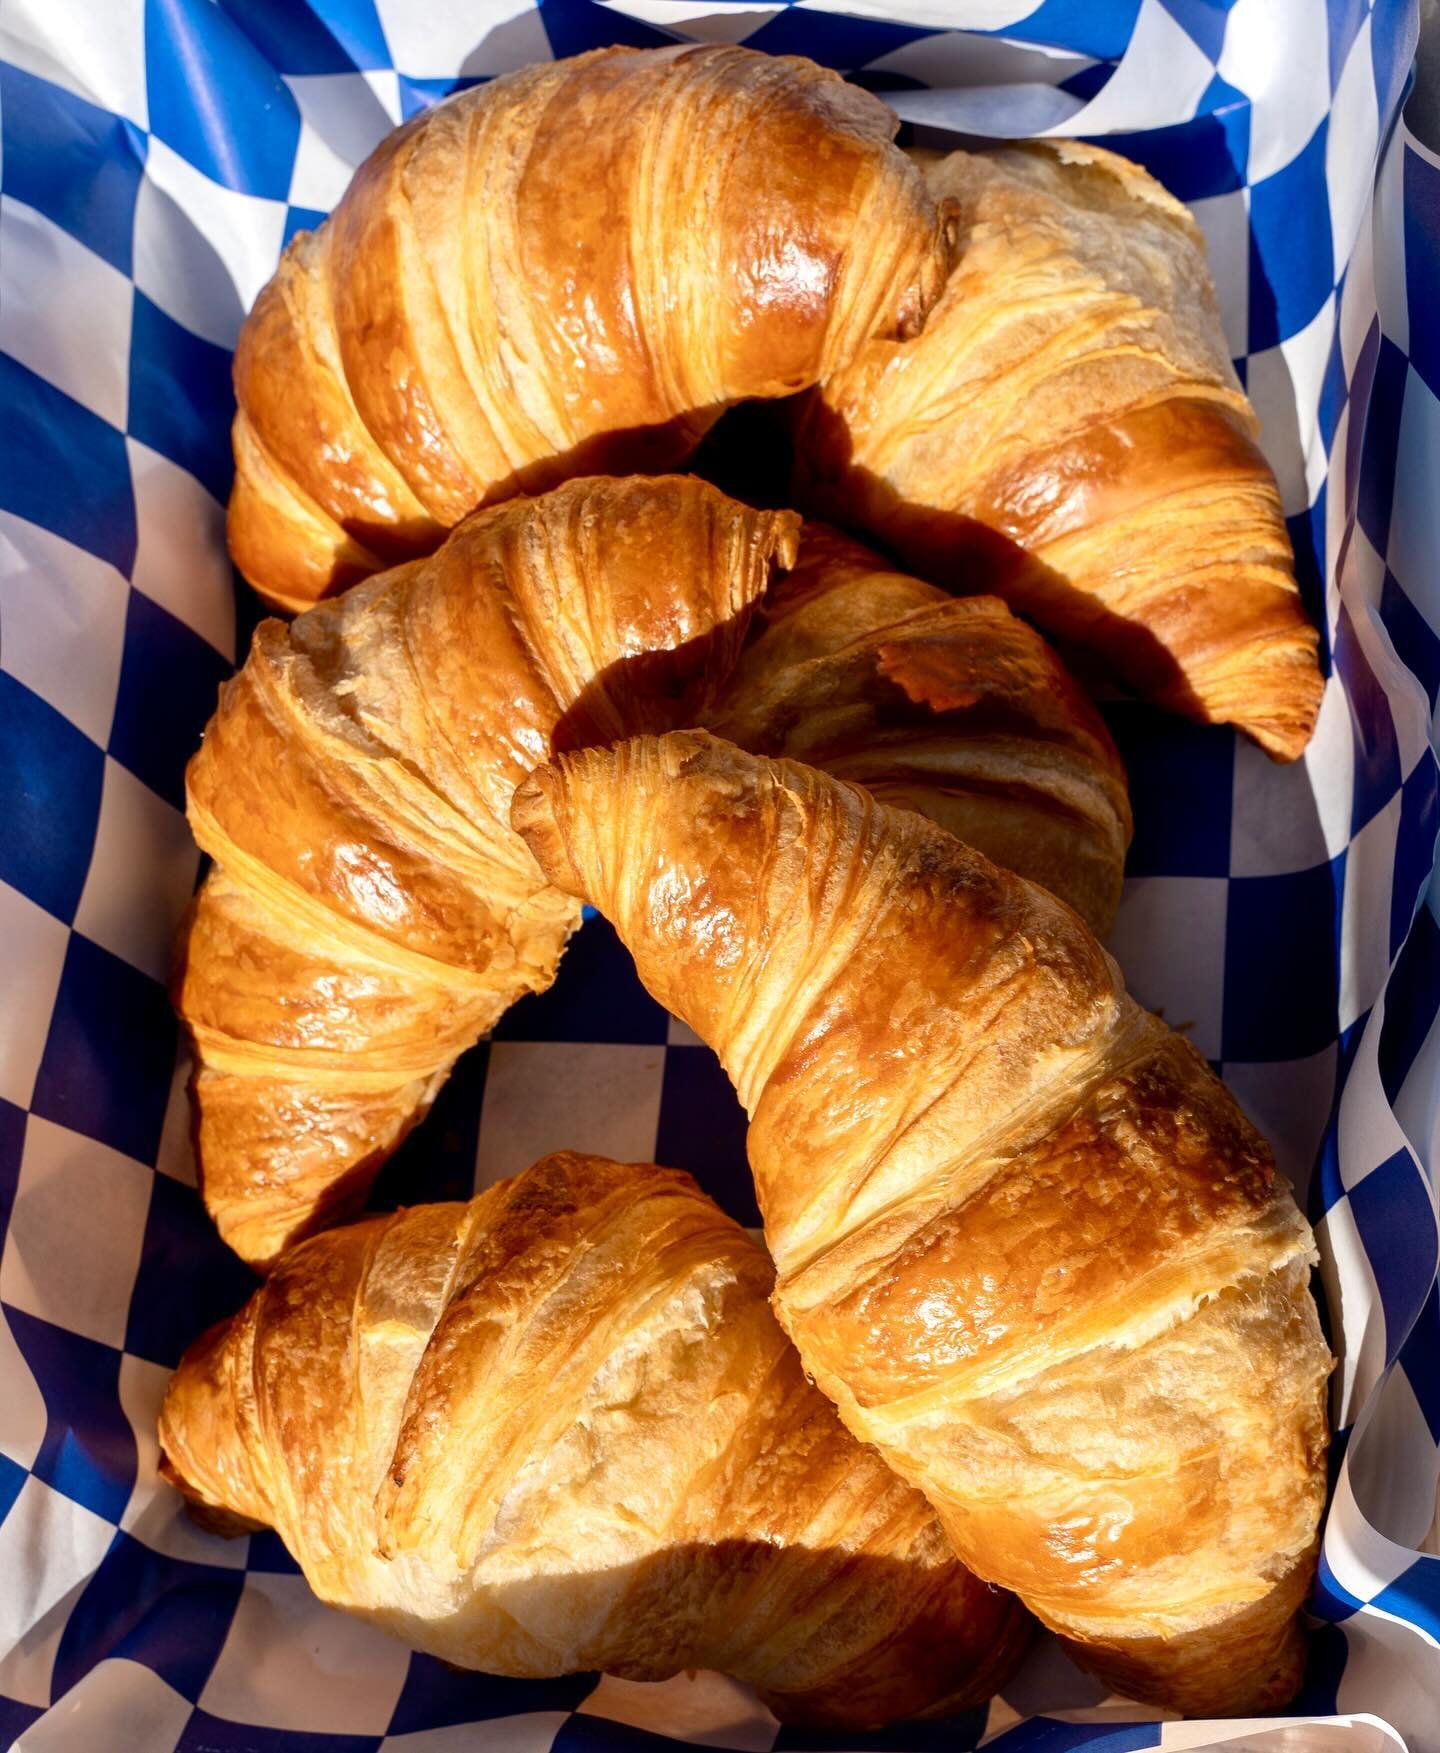 Buttery, flaky croissants 🥐 available daily at Georgie&rsquo;s!

📸: @collinkeysmedia 

#shadysideeats #pittsburghfoodie #pghbakery #pittsburghcoffee #supportlocal #shadysidecafe #pittsburghbrunch #pghcafe #localflavors #pghfoodscene #h2p #cmu  #cha